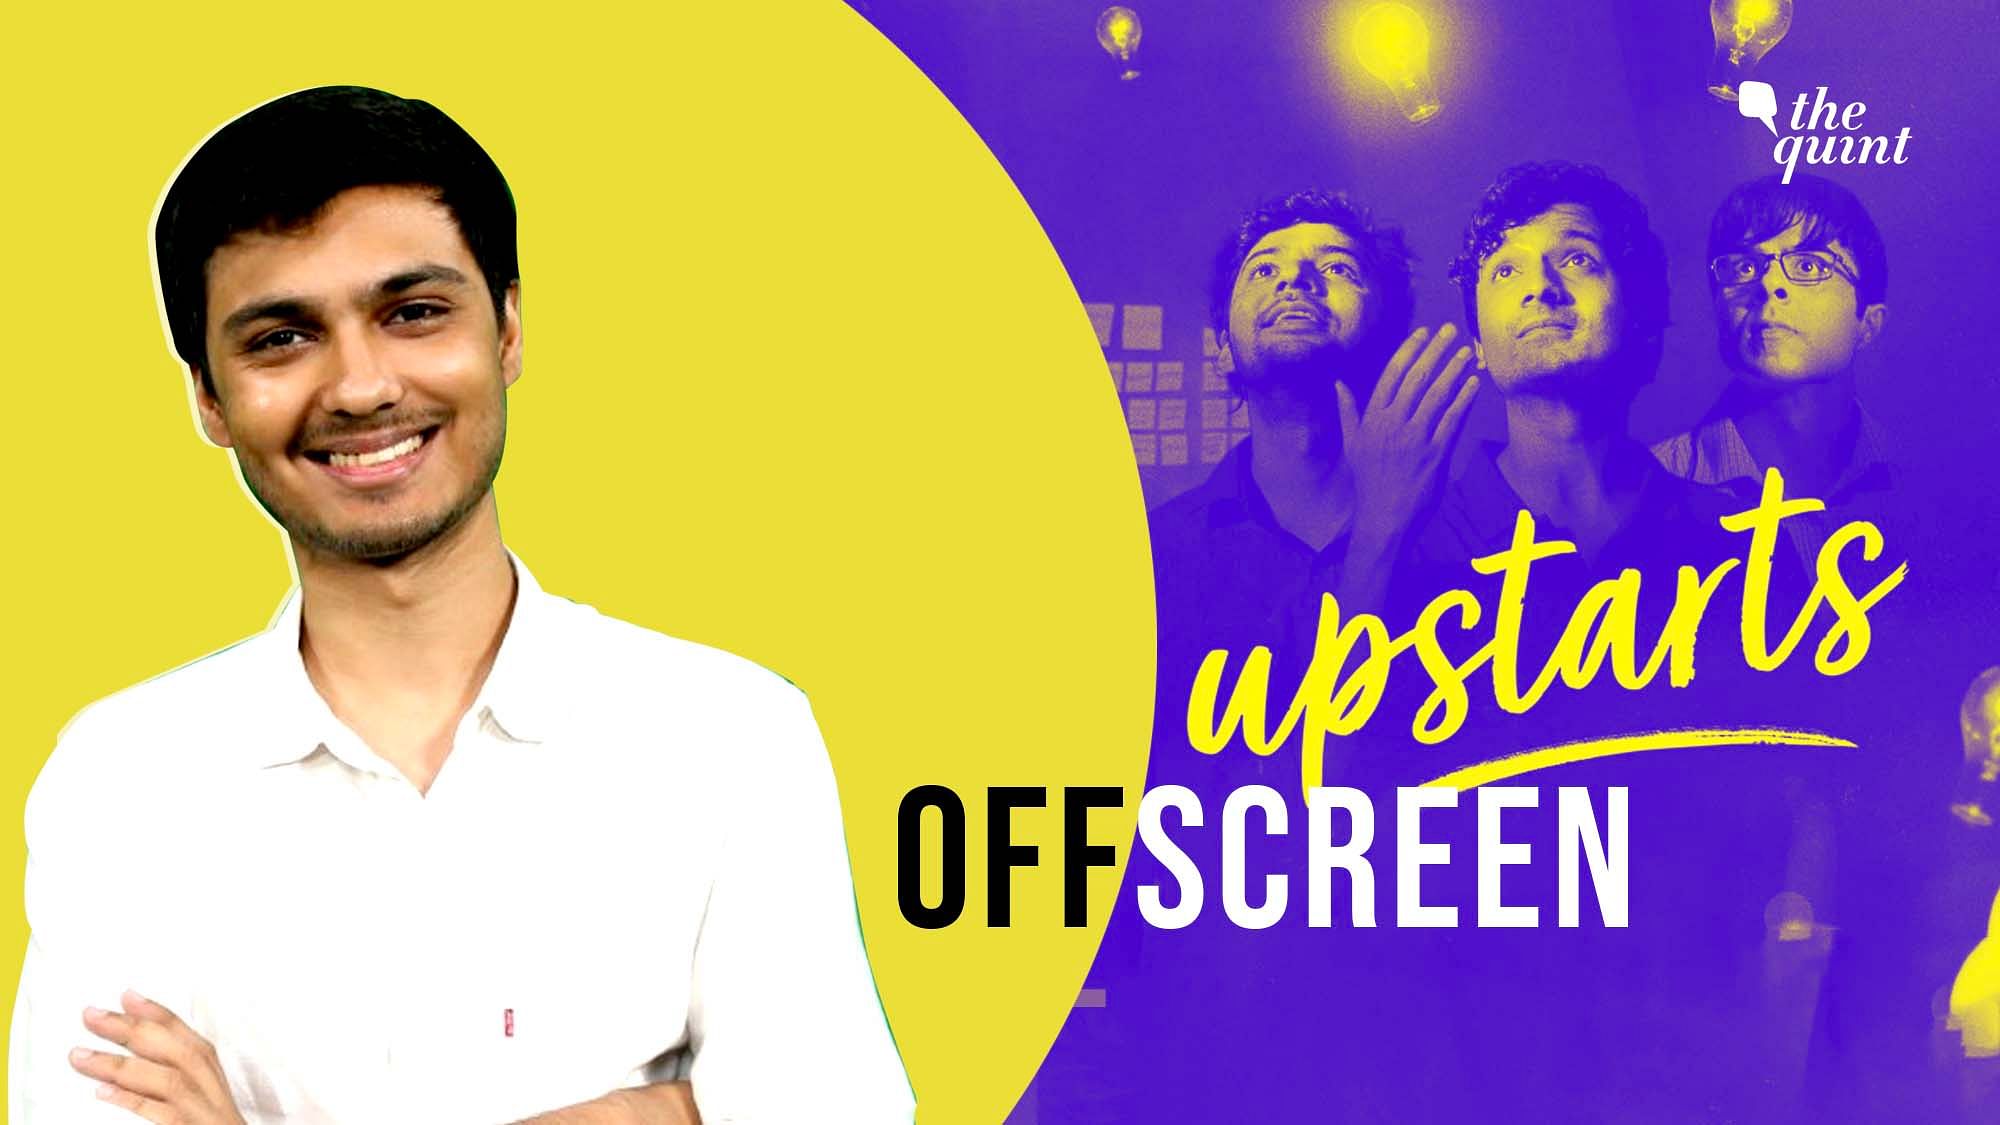 On this episode of ‘OffScreen’, we speak to the cast of <i>Upstarts</i>.